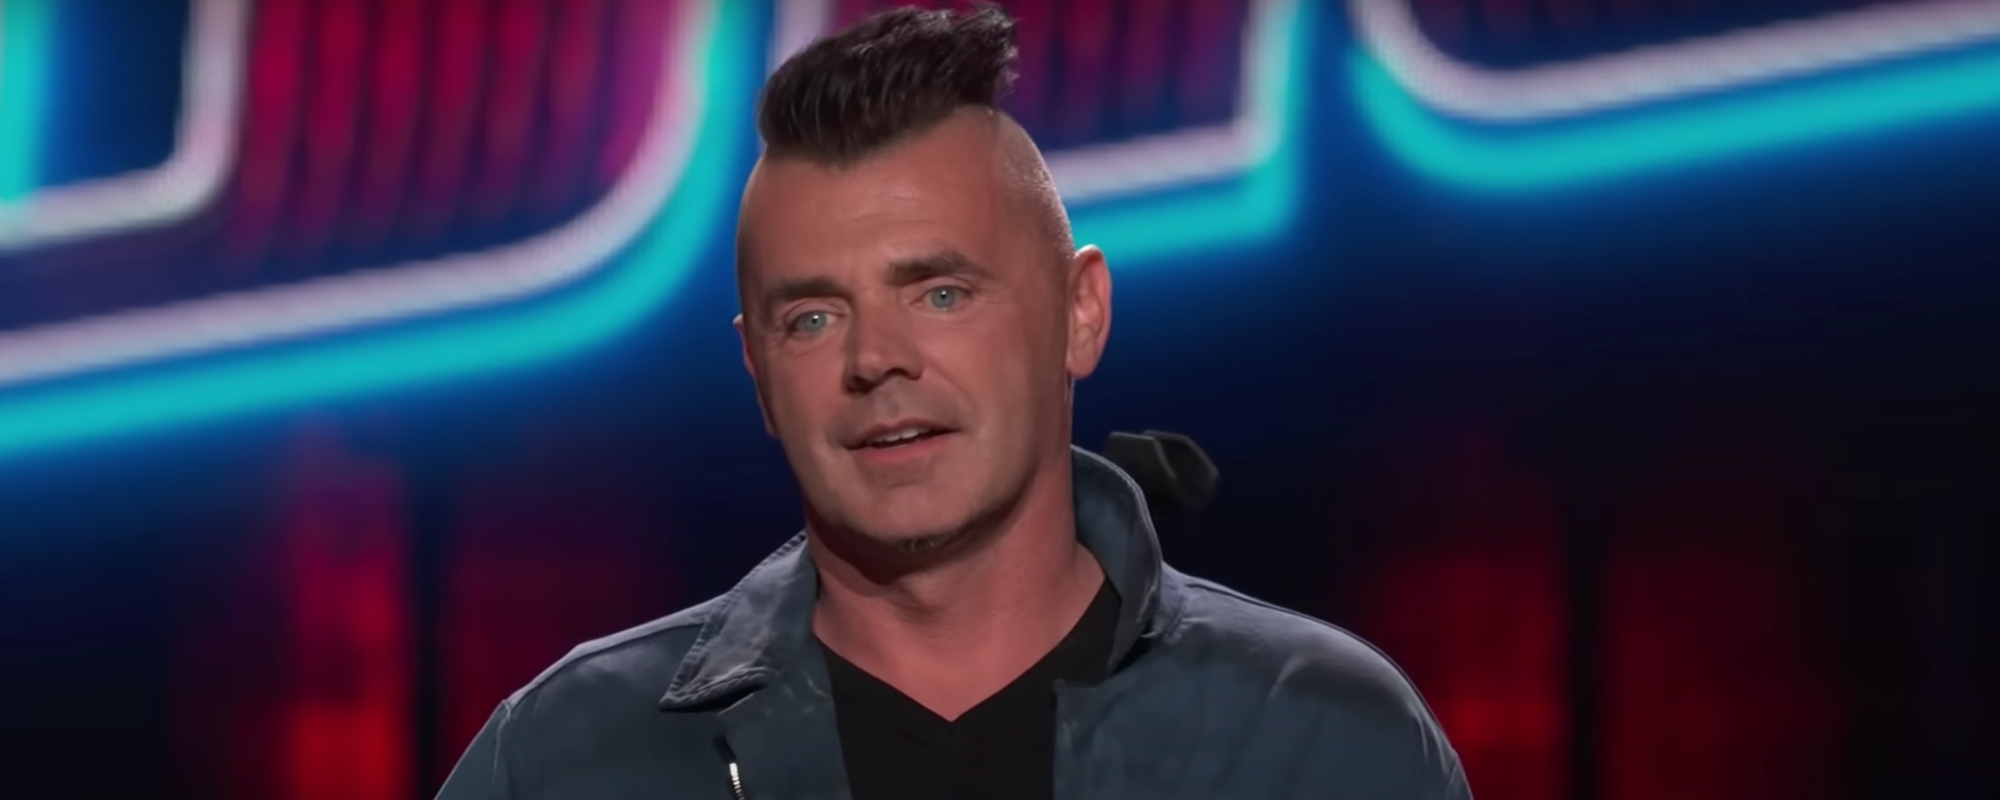 3 Quick Facts About ‘The Voice’ Contestant Bryan Olesen